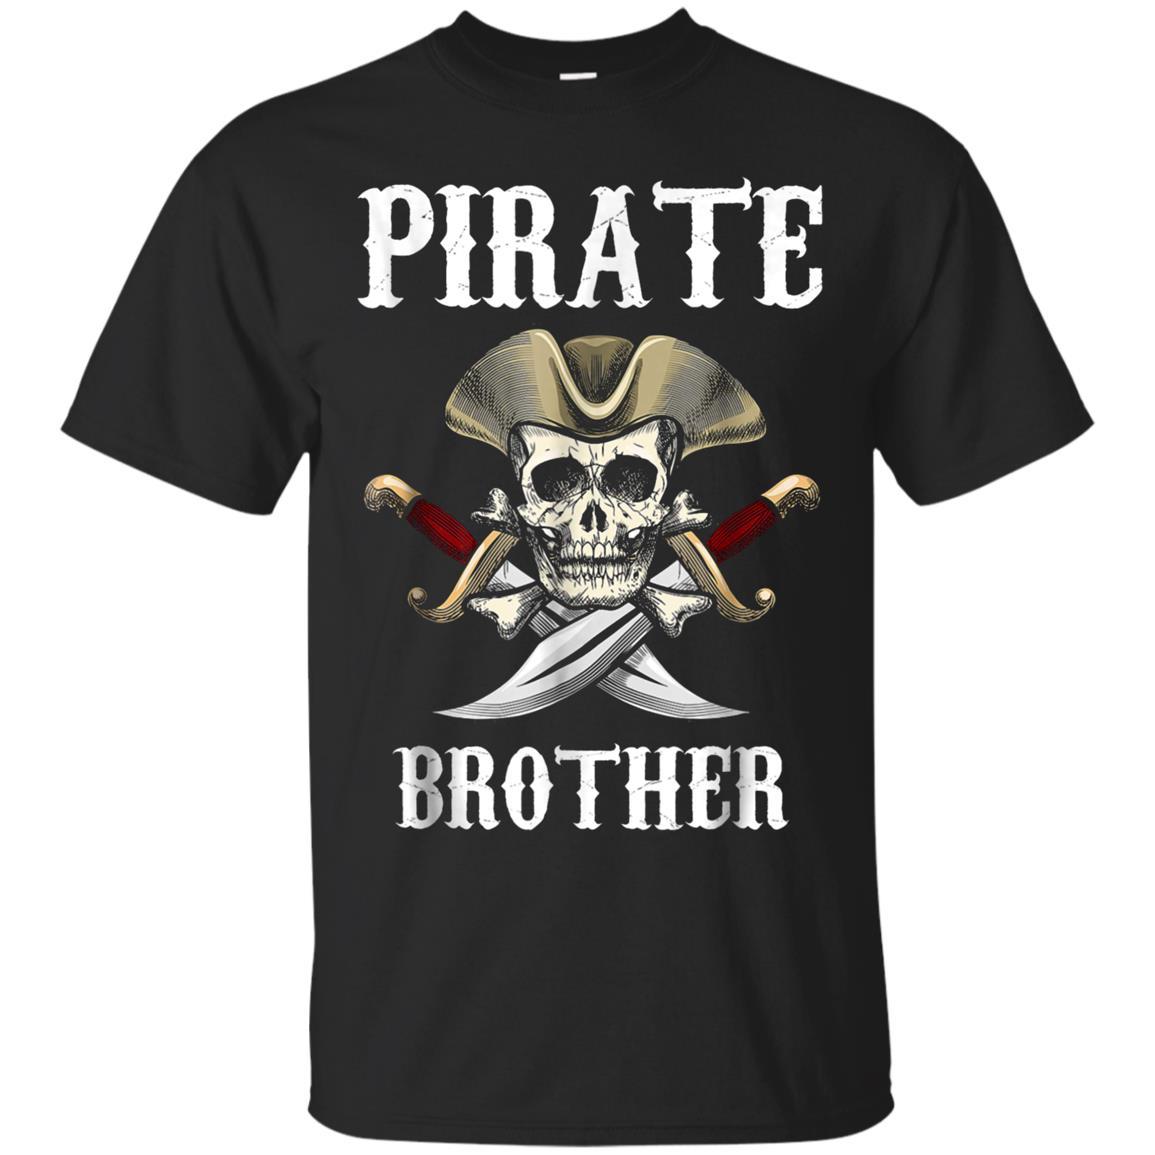 Pirate Brother Halloween T-shirt Skull Adult Costume Gifts